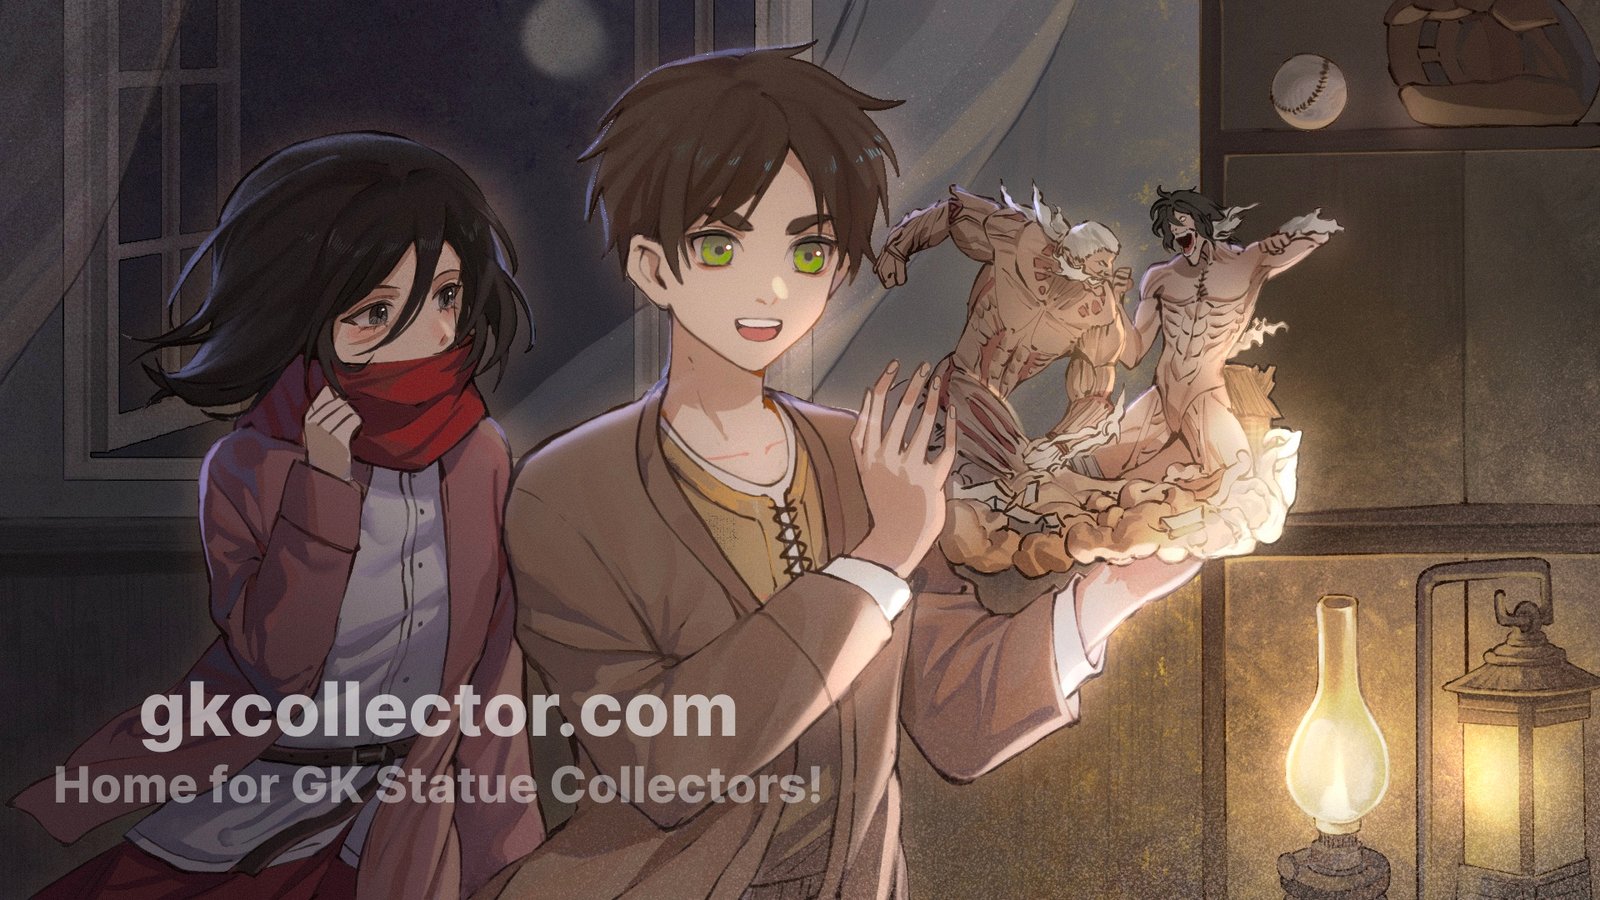 This is an imaginary scene from Attack on Titan: young Eren Yeager joyfully places a GK statue onto his shelf, which vividly portrays the epic fight between the Attack Titan (Eren Titan) and the Armored Titan (Reiner Braun). Meanwhile, young Mikasa Ackerman gazes at him, enthralled by his indulgence in GK statue collection, cherishing these precious moments in their shared journey of life.